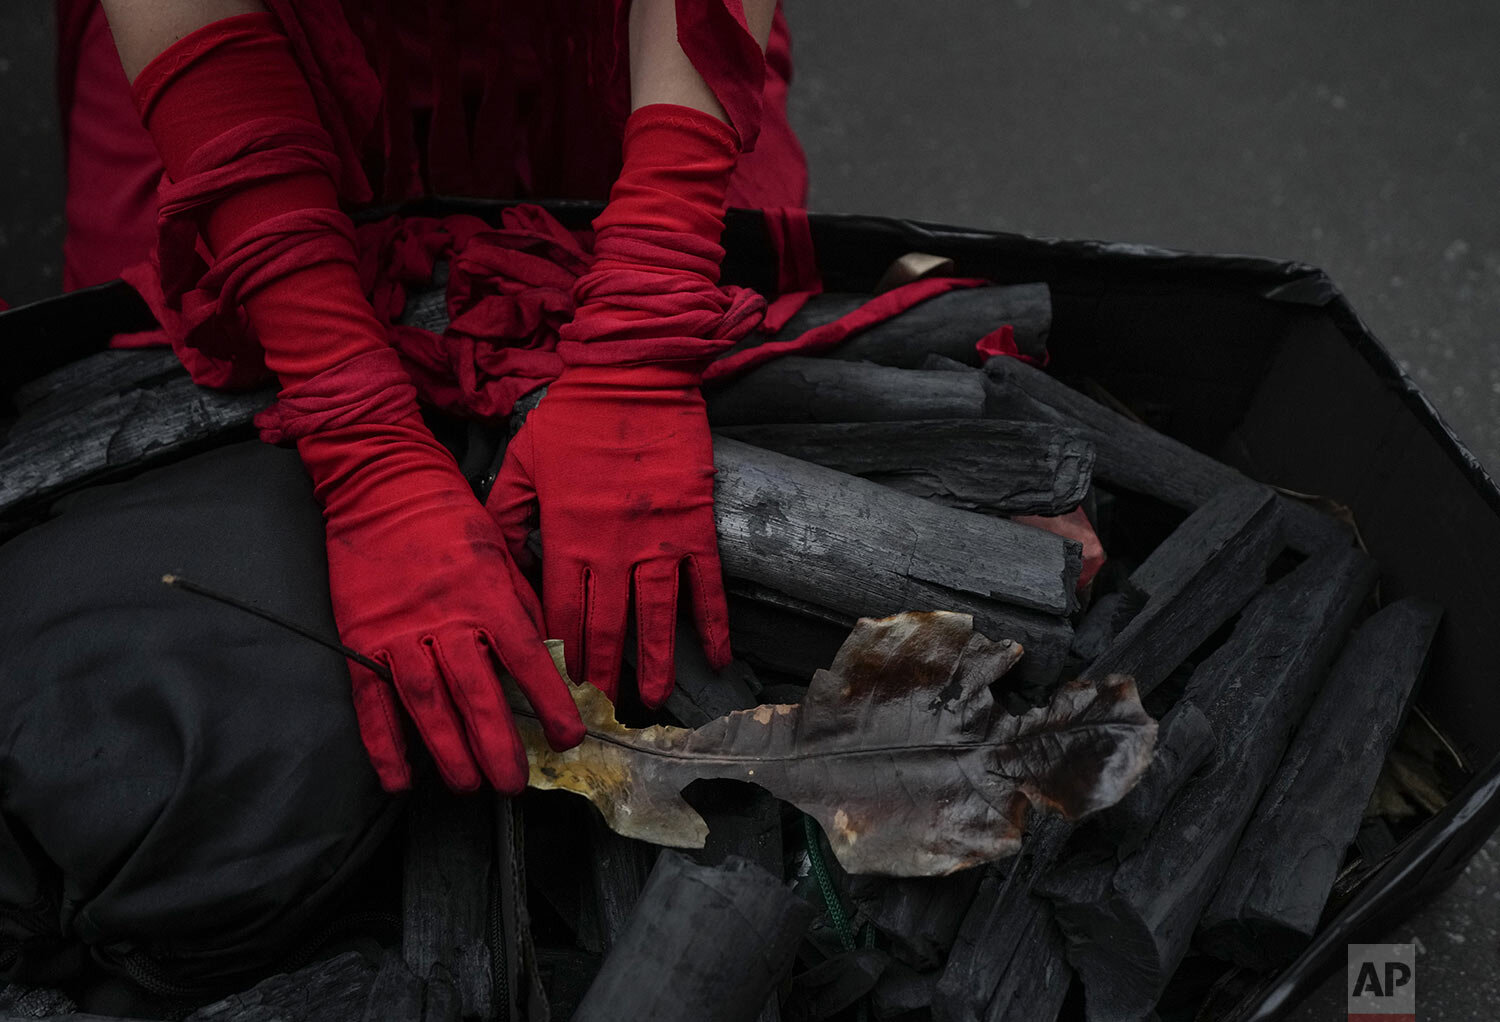  A  demonstrator touches a burnt leaf over a mock coffin filled with charcoal, representing the death by fire of the Amazon, at a Fridays for Future global climate strike demonstration in Sao Paulo, Brazil, Sept. 24, 2021. Activists staged rallies ac